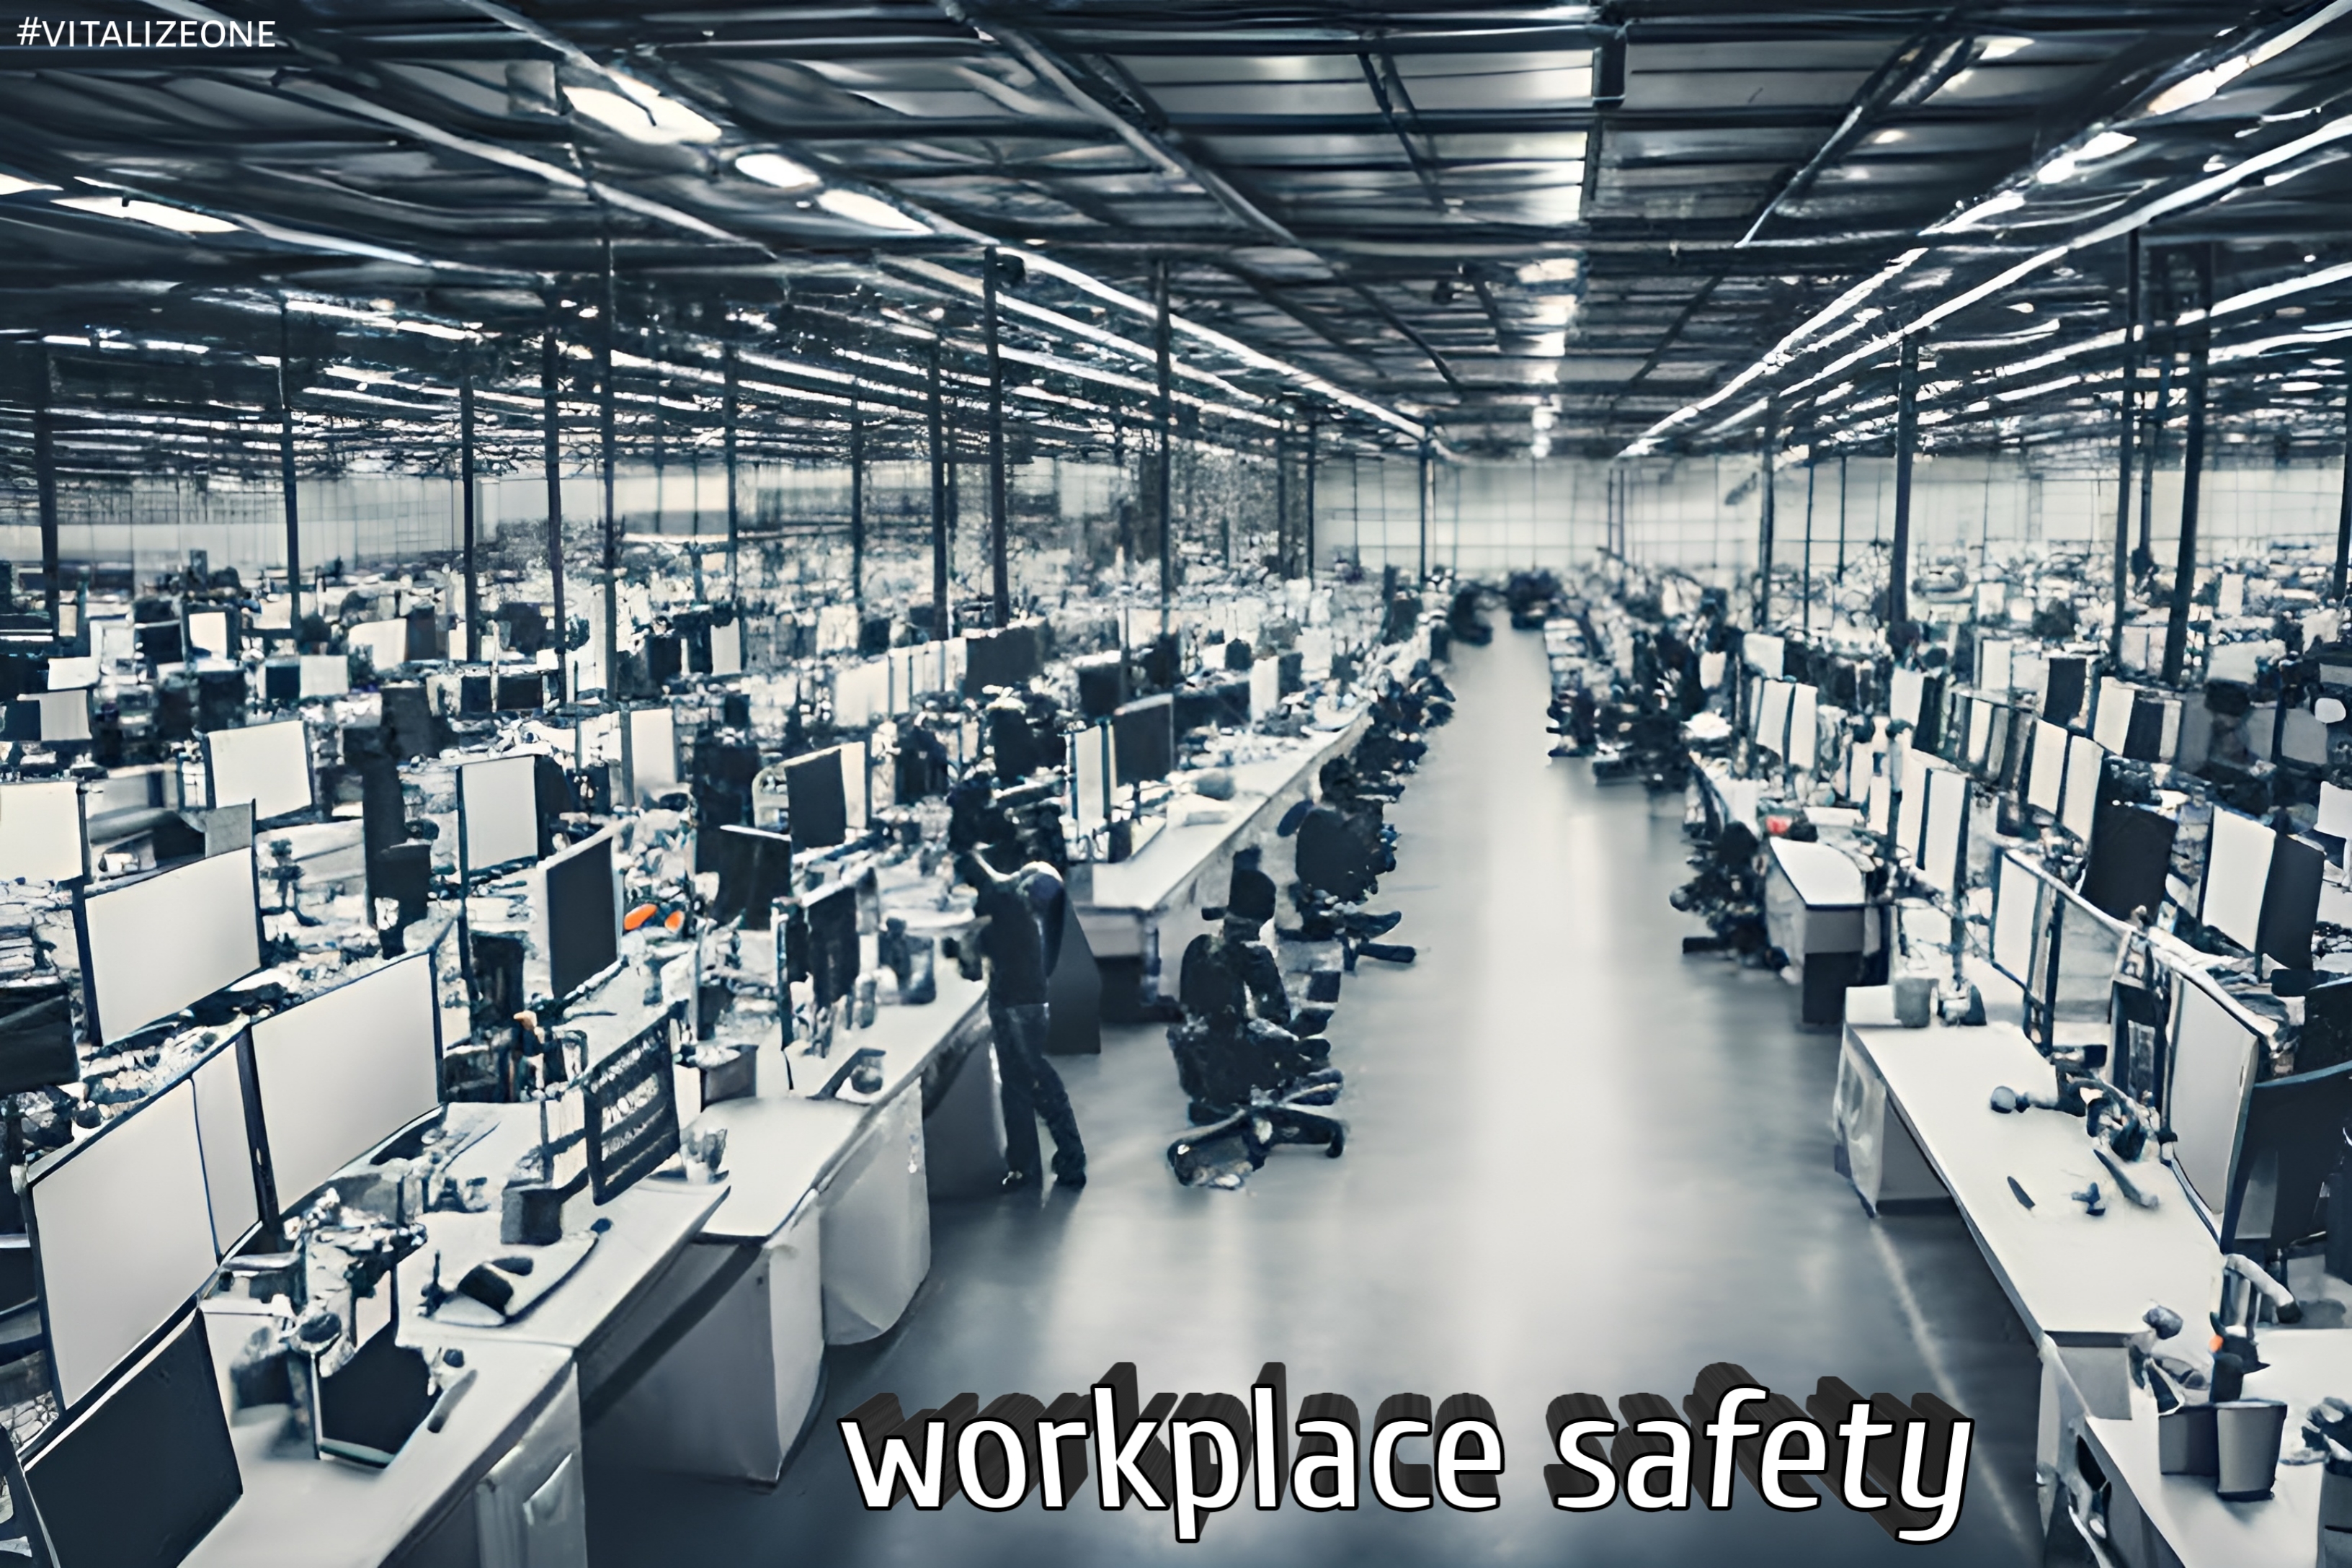 How To Improve Your Workplace Safety | Team VitalyTennant.com | #vitalizeone